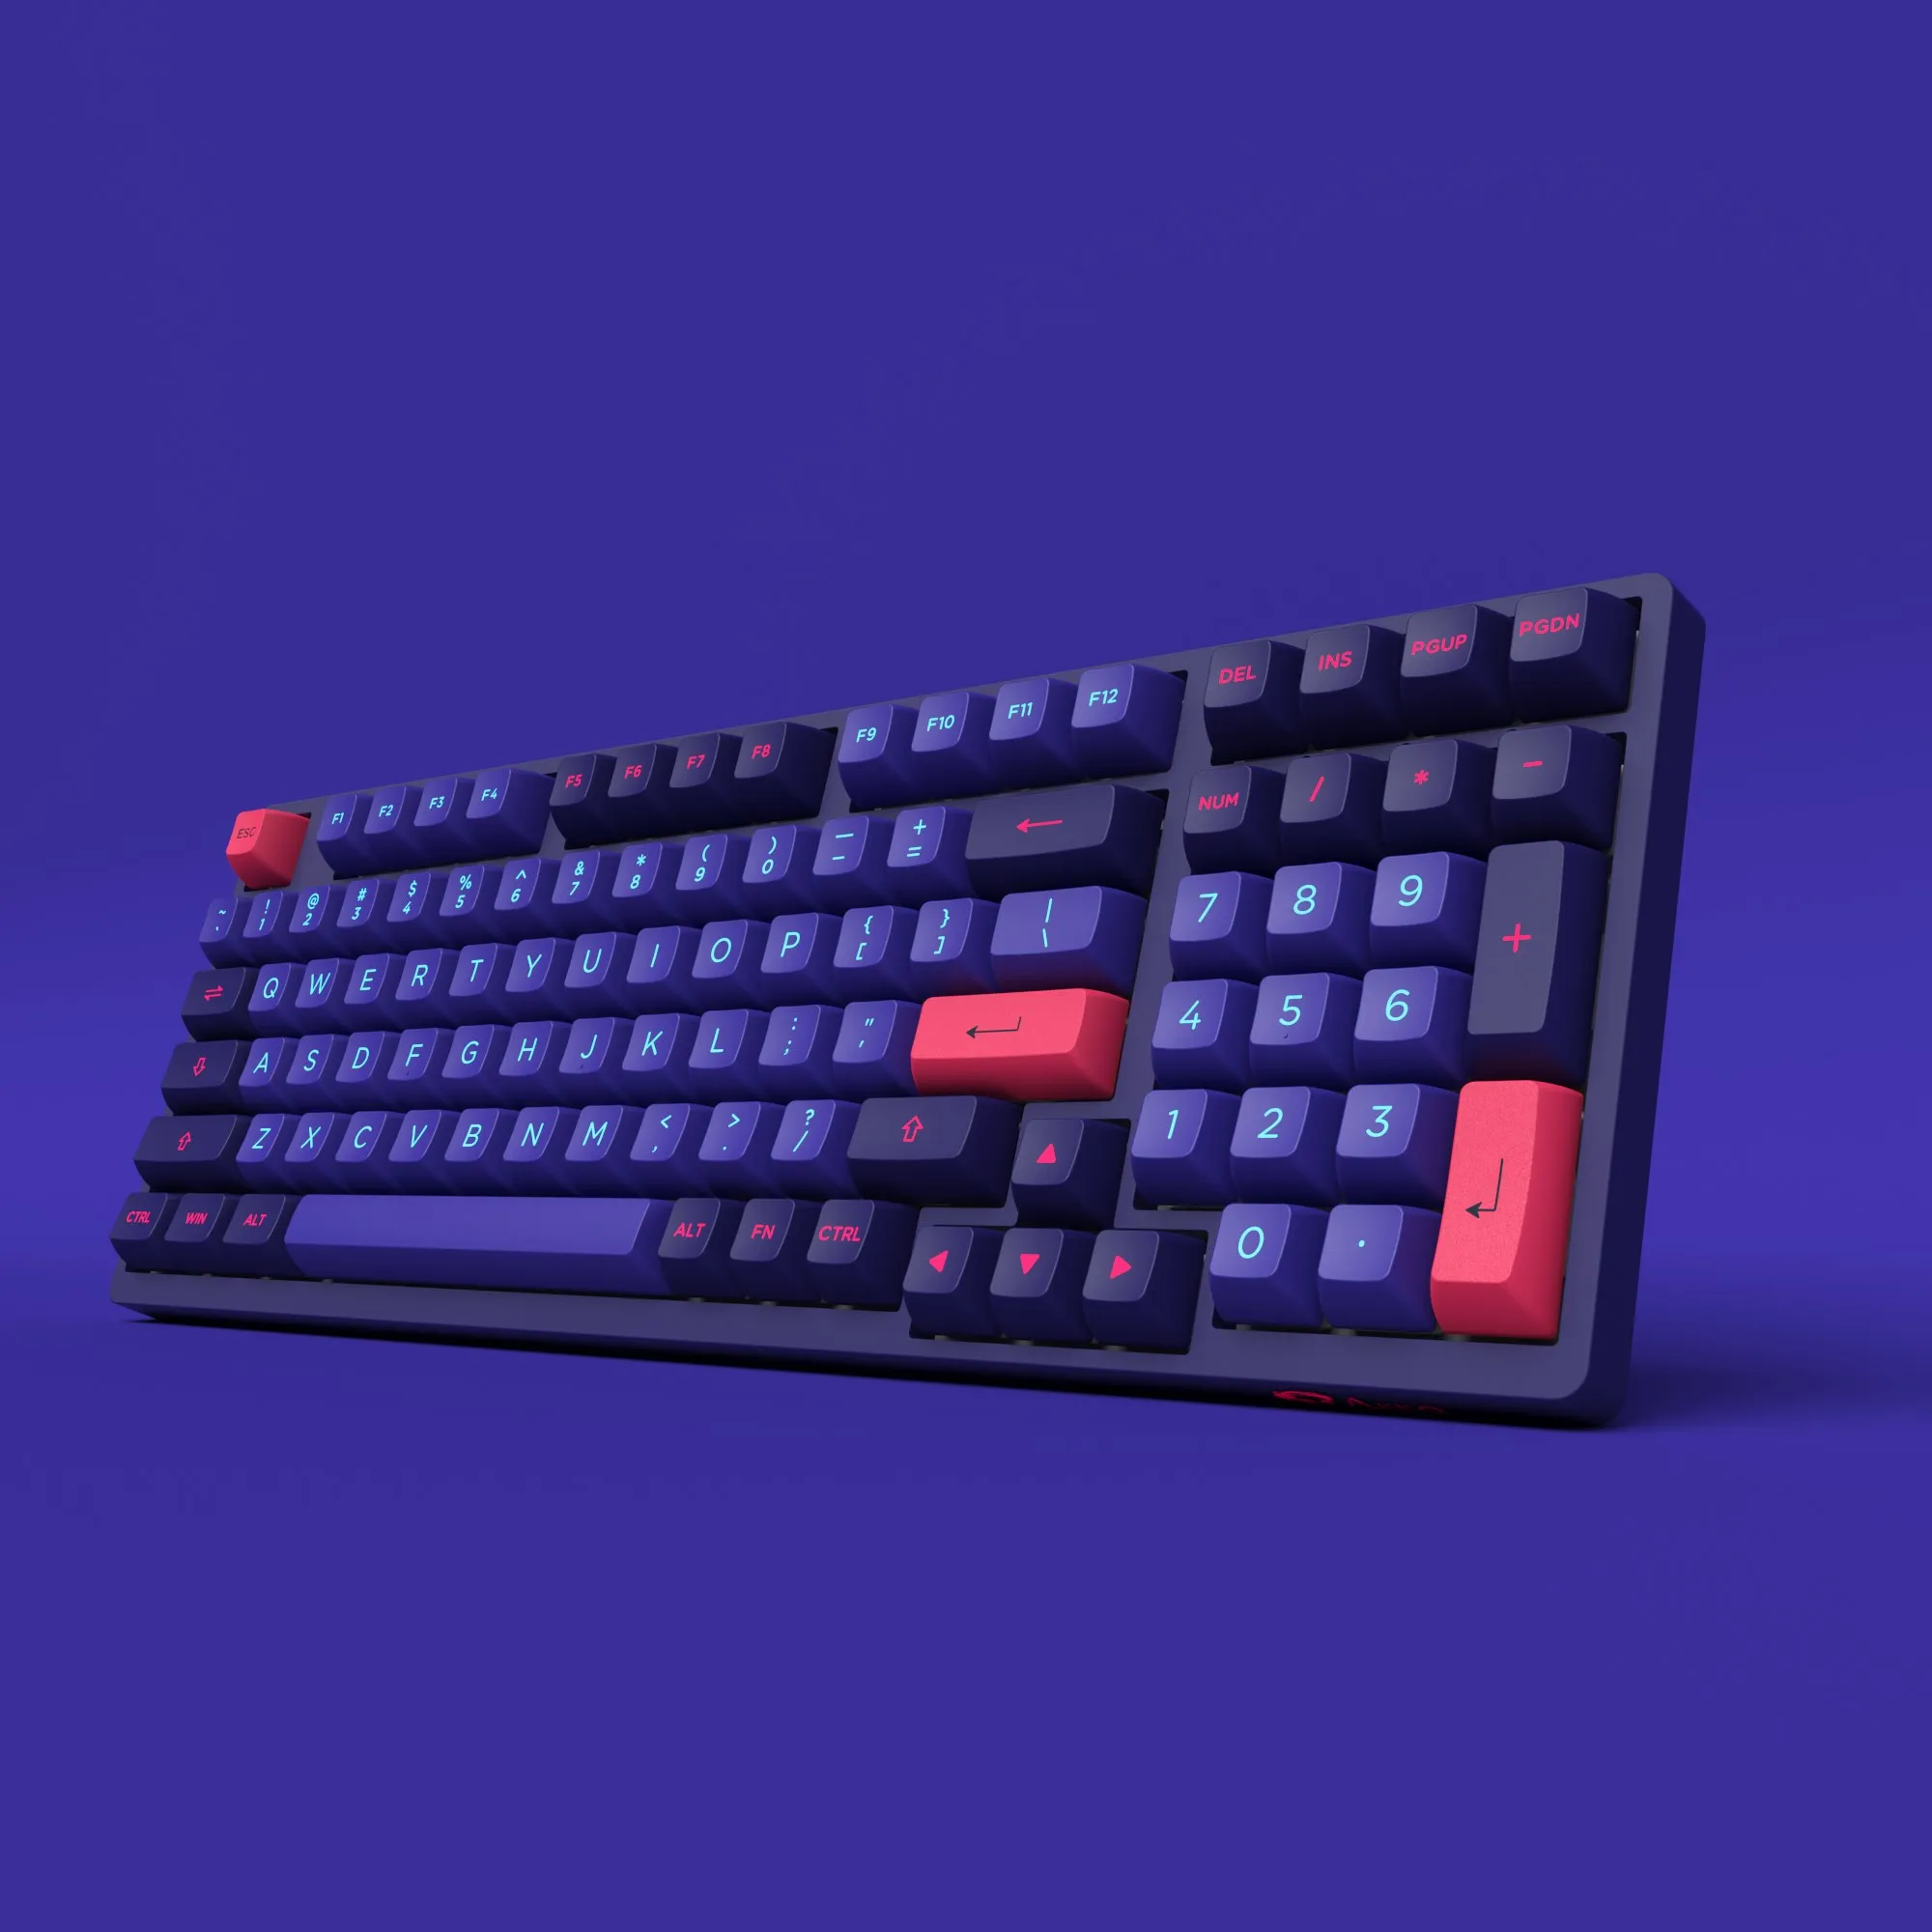 Akko 3098 Neon Full Size Wired Mechanical Gaming Keyboard PBT Double shot Keycaps for Mac Wins 3 - Pudding Keycap